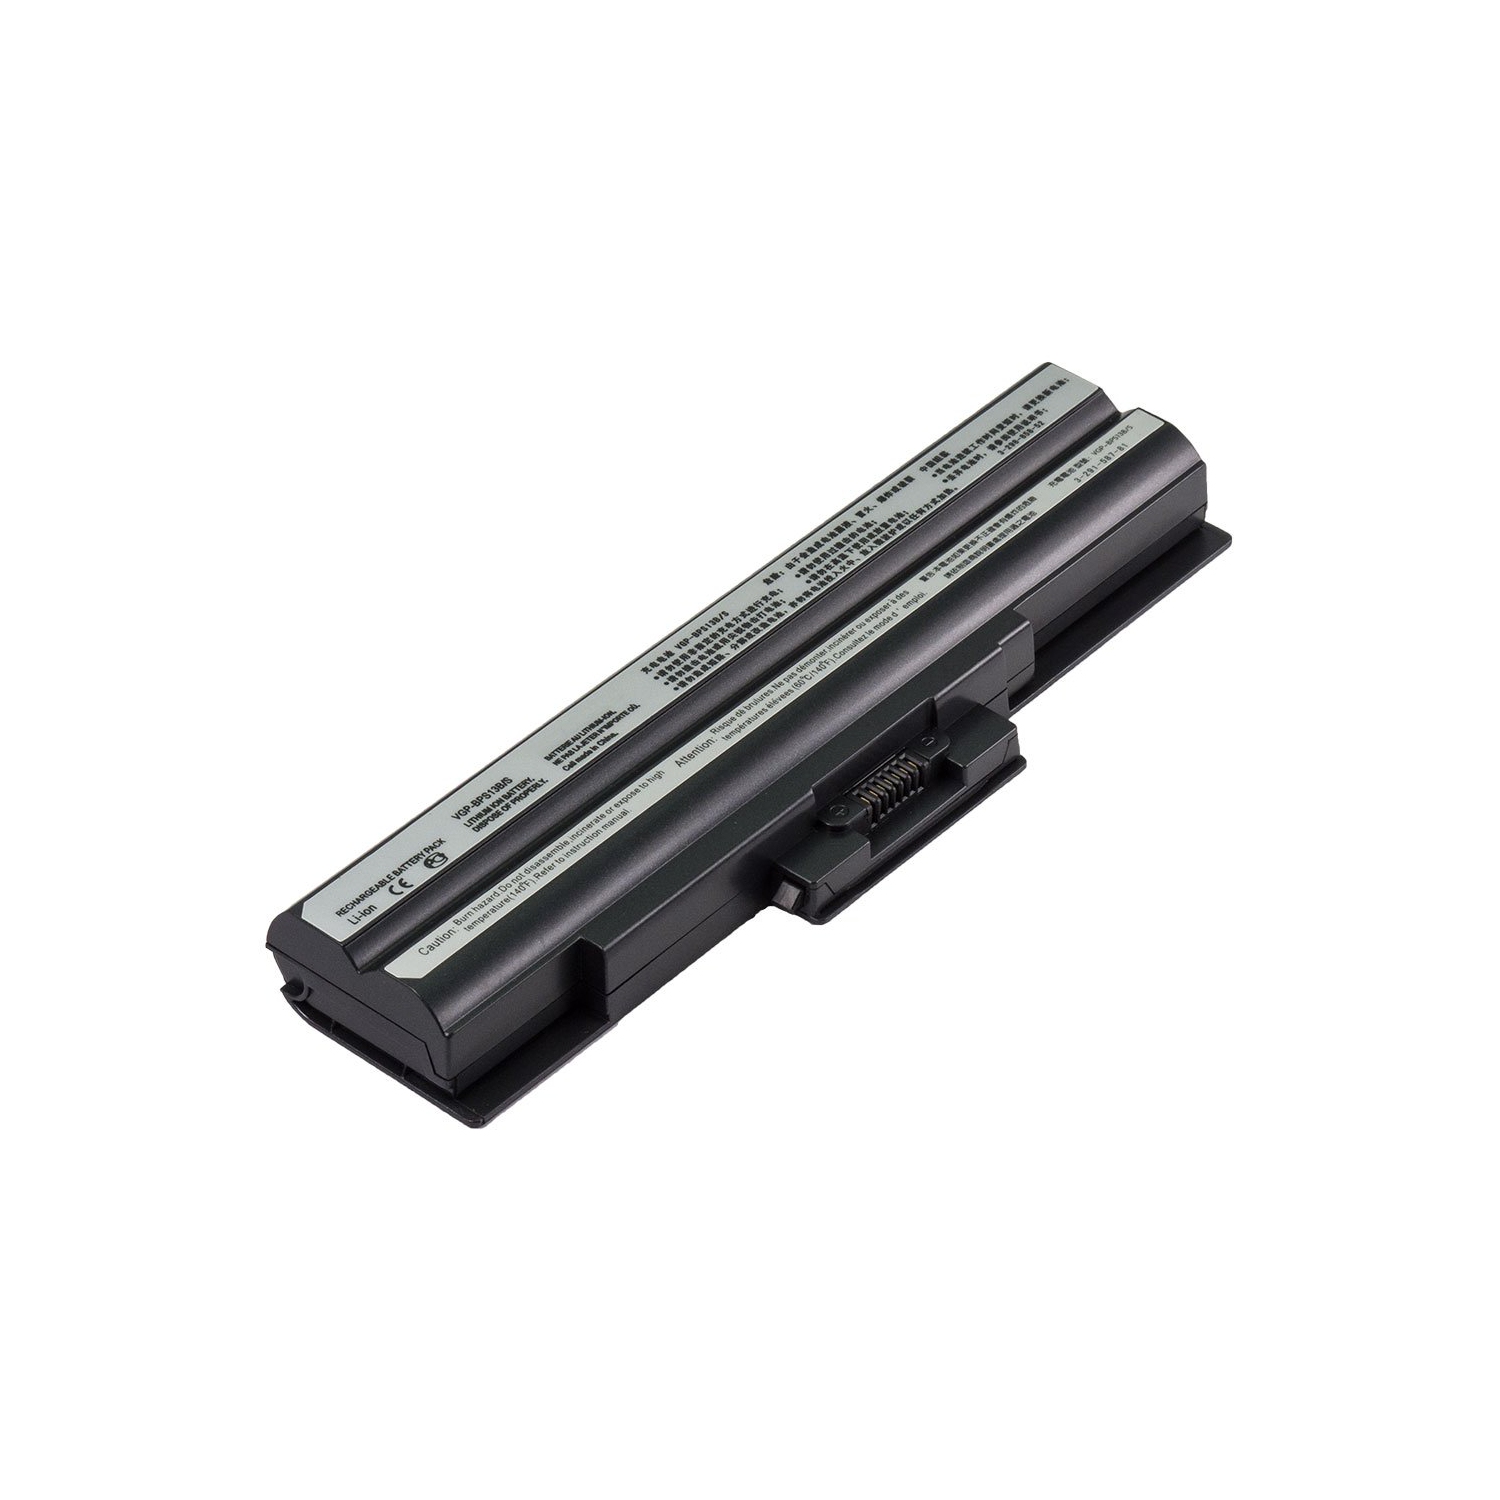 Laptop Battery Replacement for Sony VAIO VGN-SR140E/P, VGP-BPS13, VGP-BPS13/S, VGP-BPS13A/Q, VGP-BPS13B/B, VGP-BSP13/S